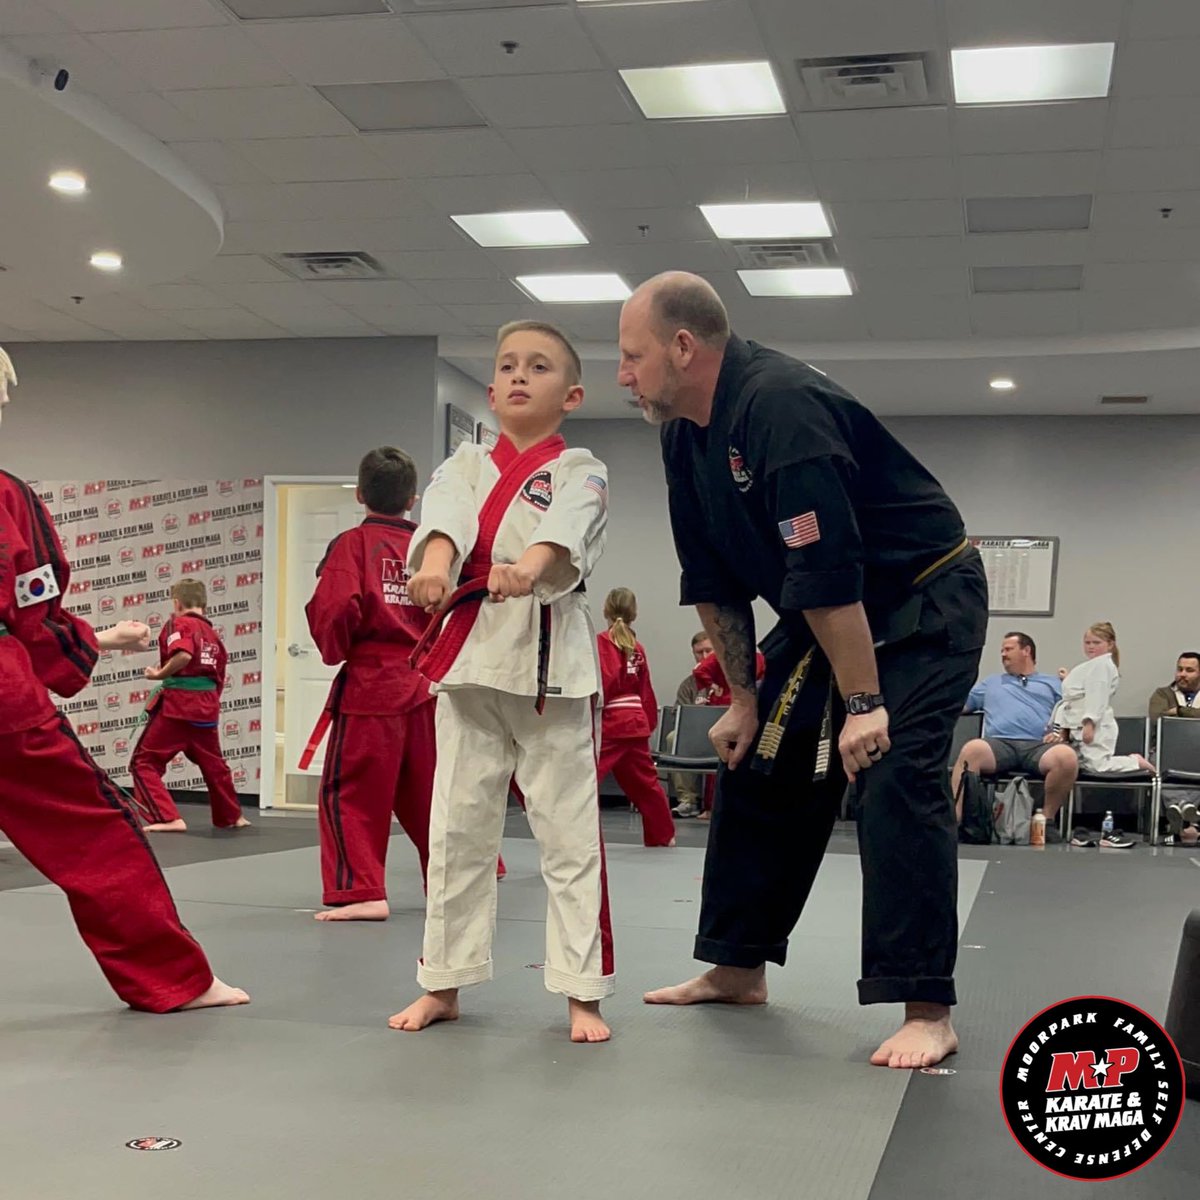 Our instructors love one on one time with our students! Private lessons are a great way to sharpen skills or work on challenging techniques, even more importantly, to develop a deeper relationship between students and instructors.